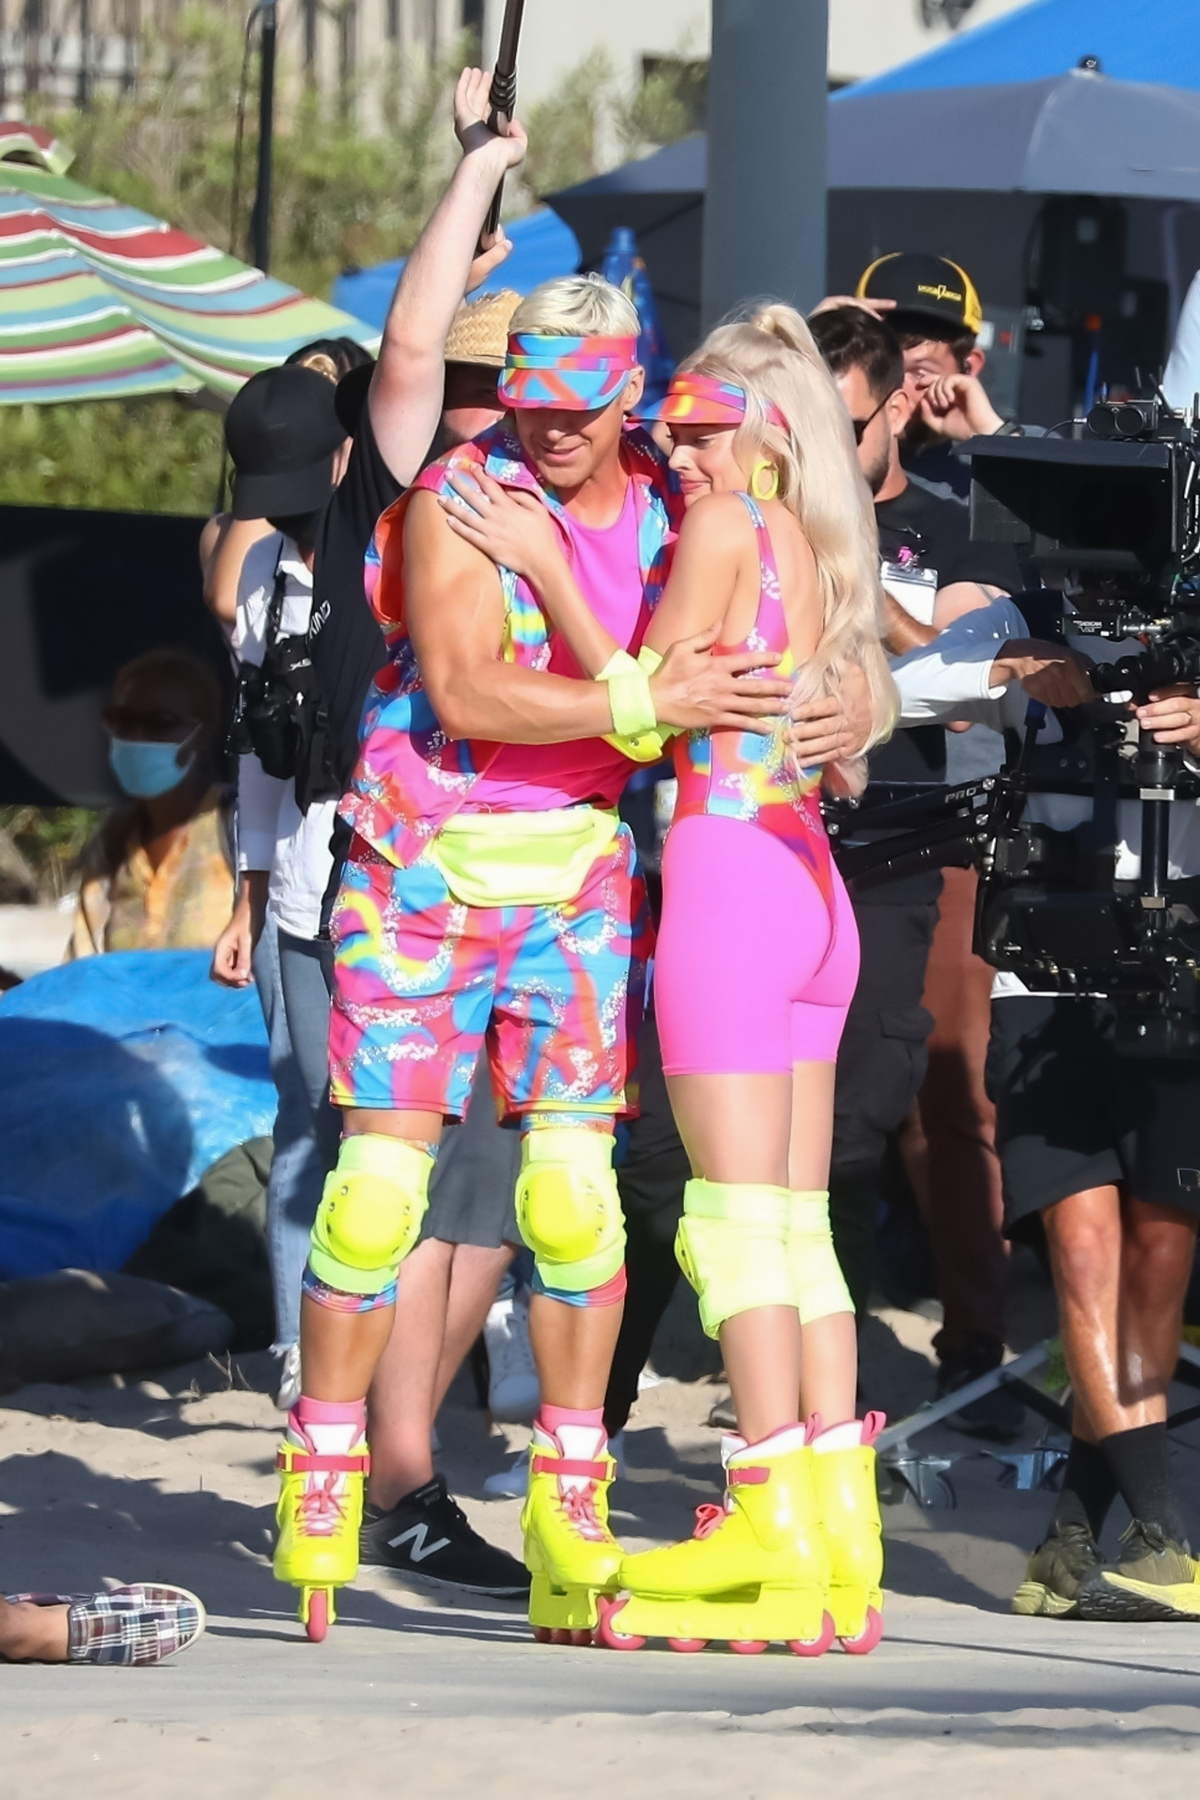 Margot Robbie And Ryan Gosling Put On A Colorful Display While Filming A Roller Skating Scene